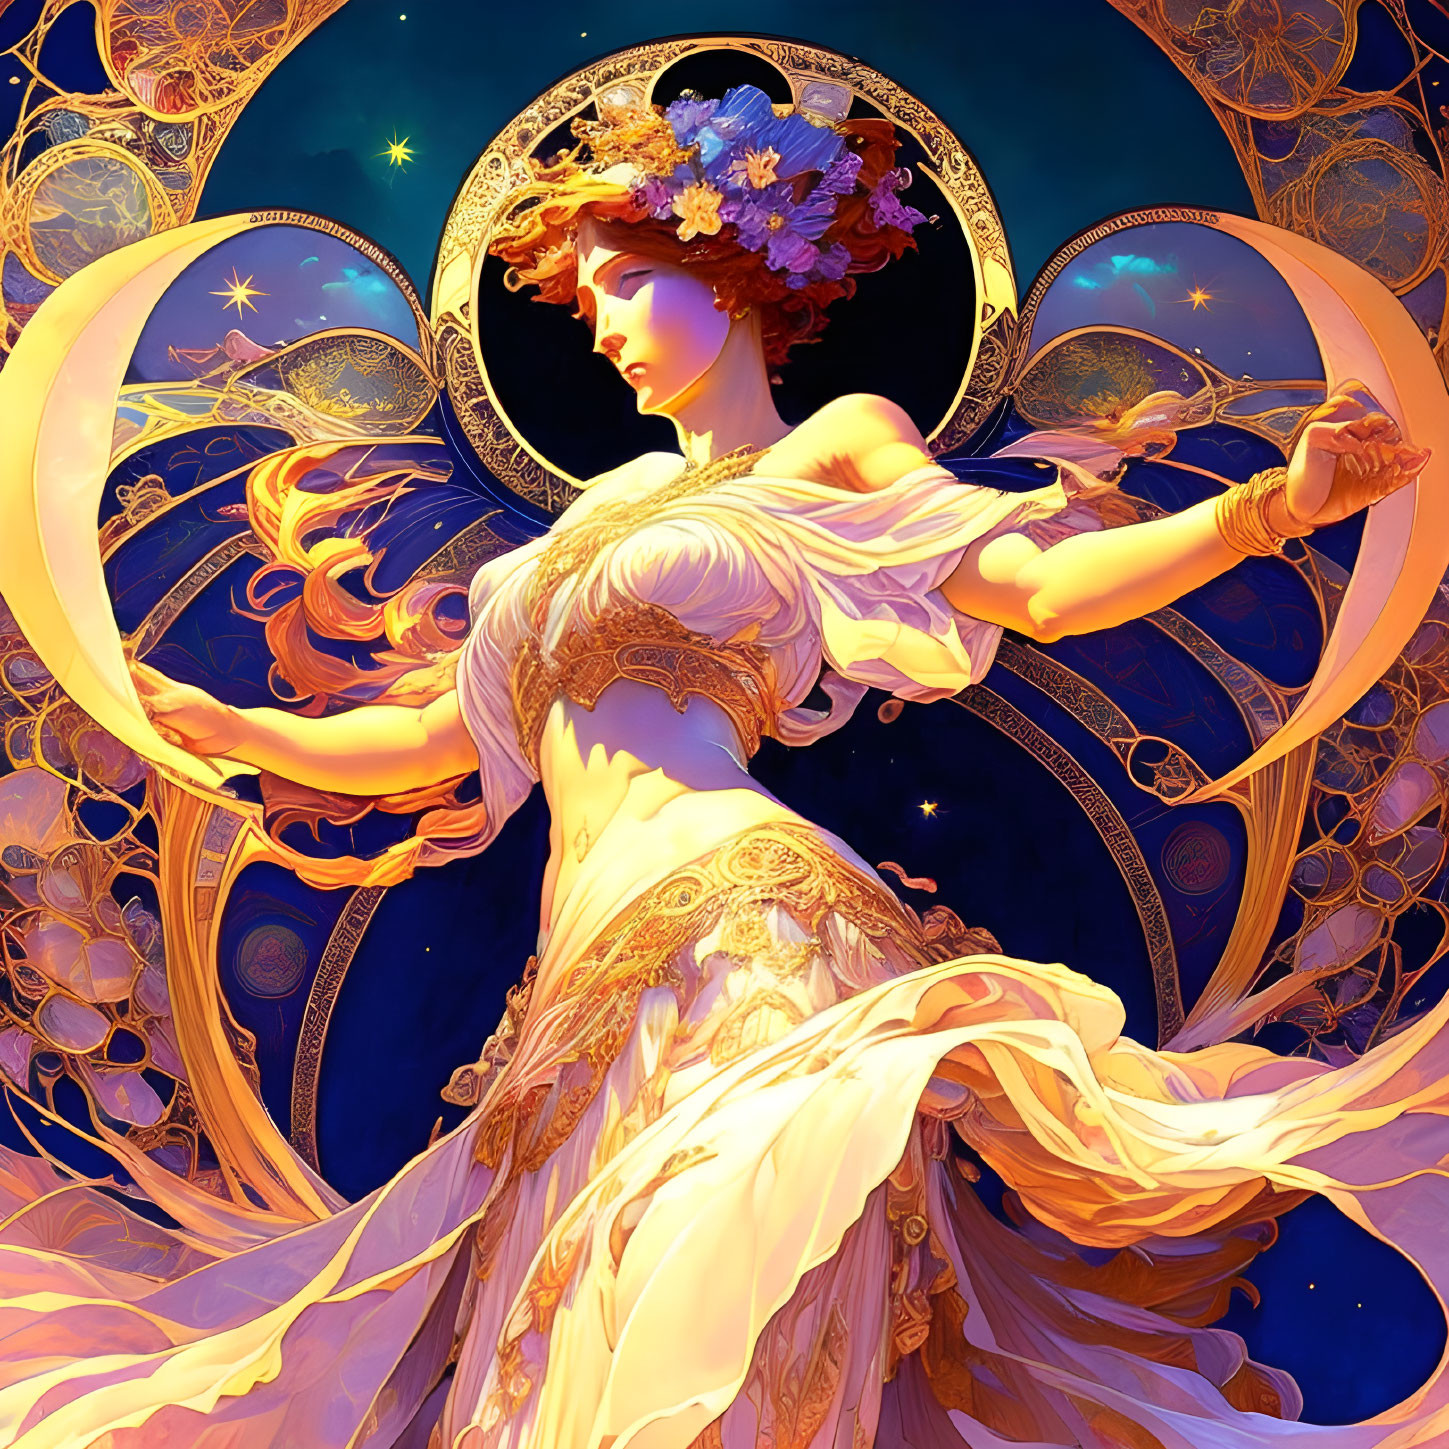 Illustrated woman in flowing dress with crescent moon and stars